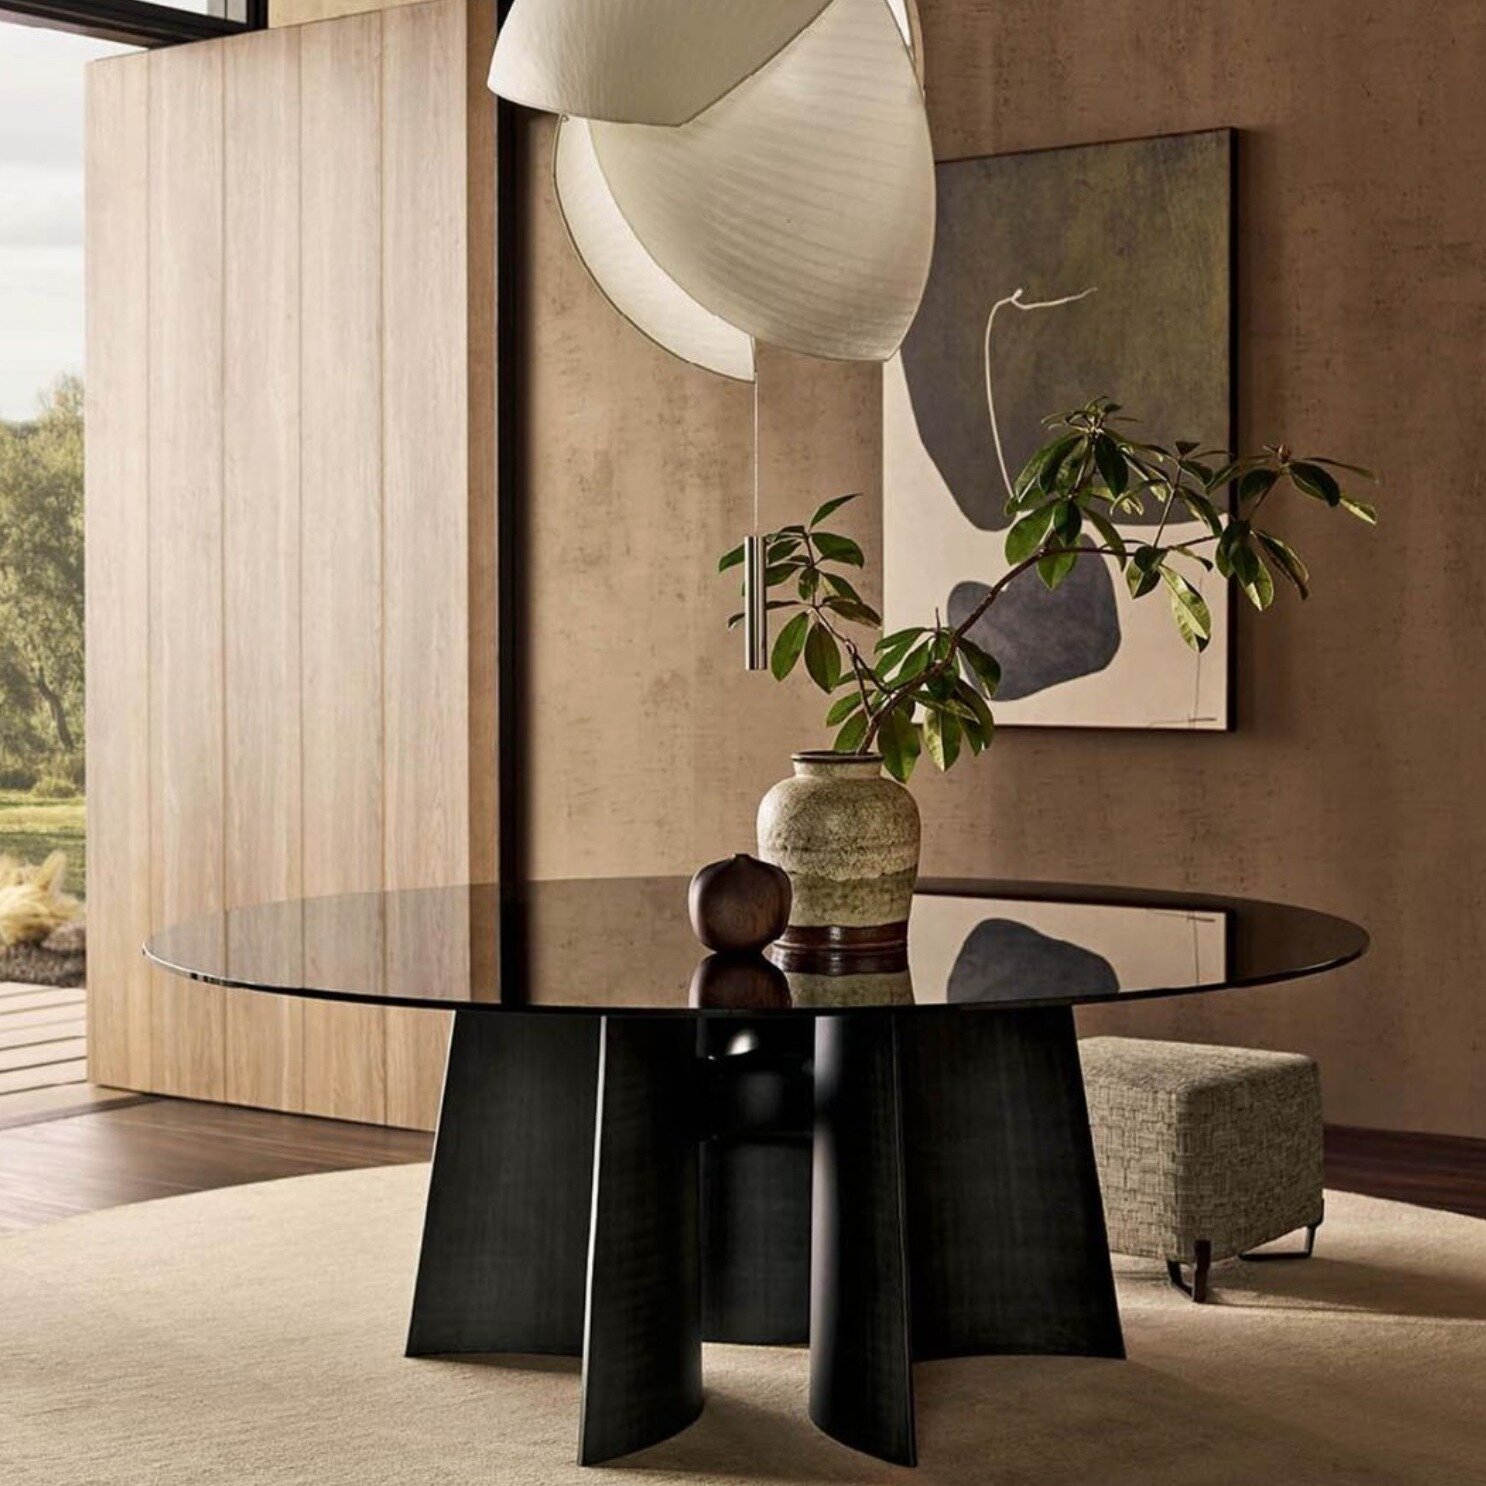 Some hump day inspiration via @poliformsf  today! Scheming and envisioning how to use the beautiful Kensington table in our next project!

#poliform #design #madeinitaly #home #homedesign #livingroom #diningtable #poliformdiningtable #poliformtable #